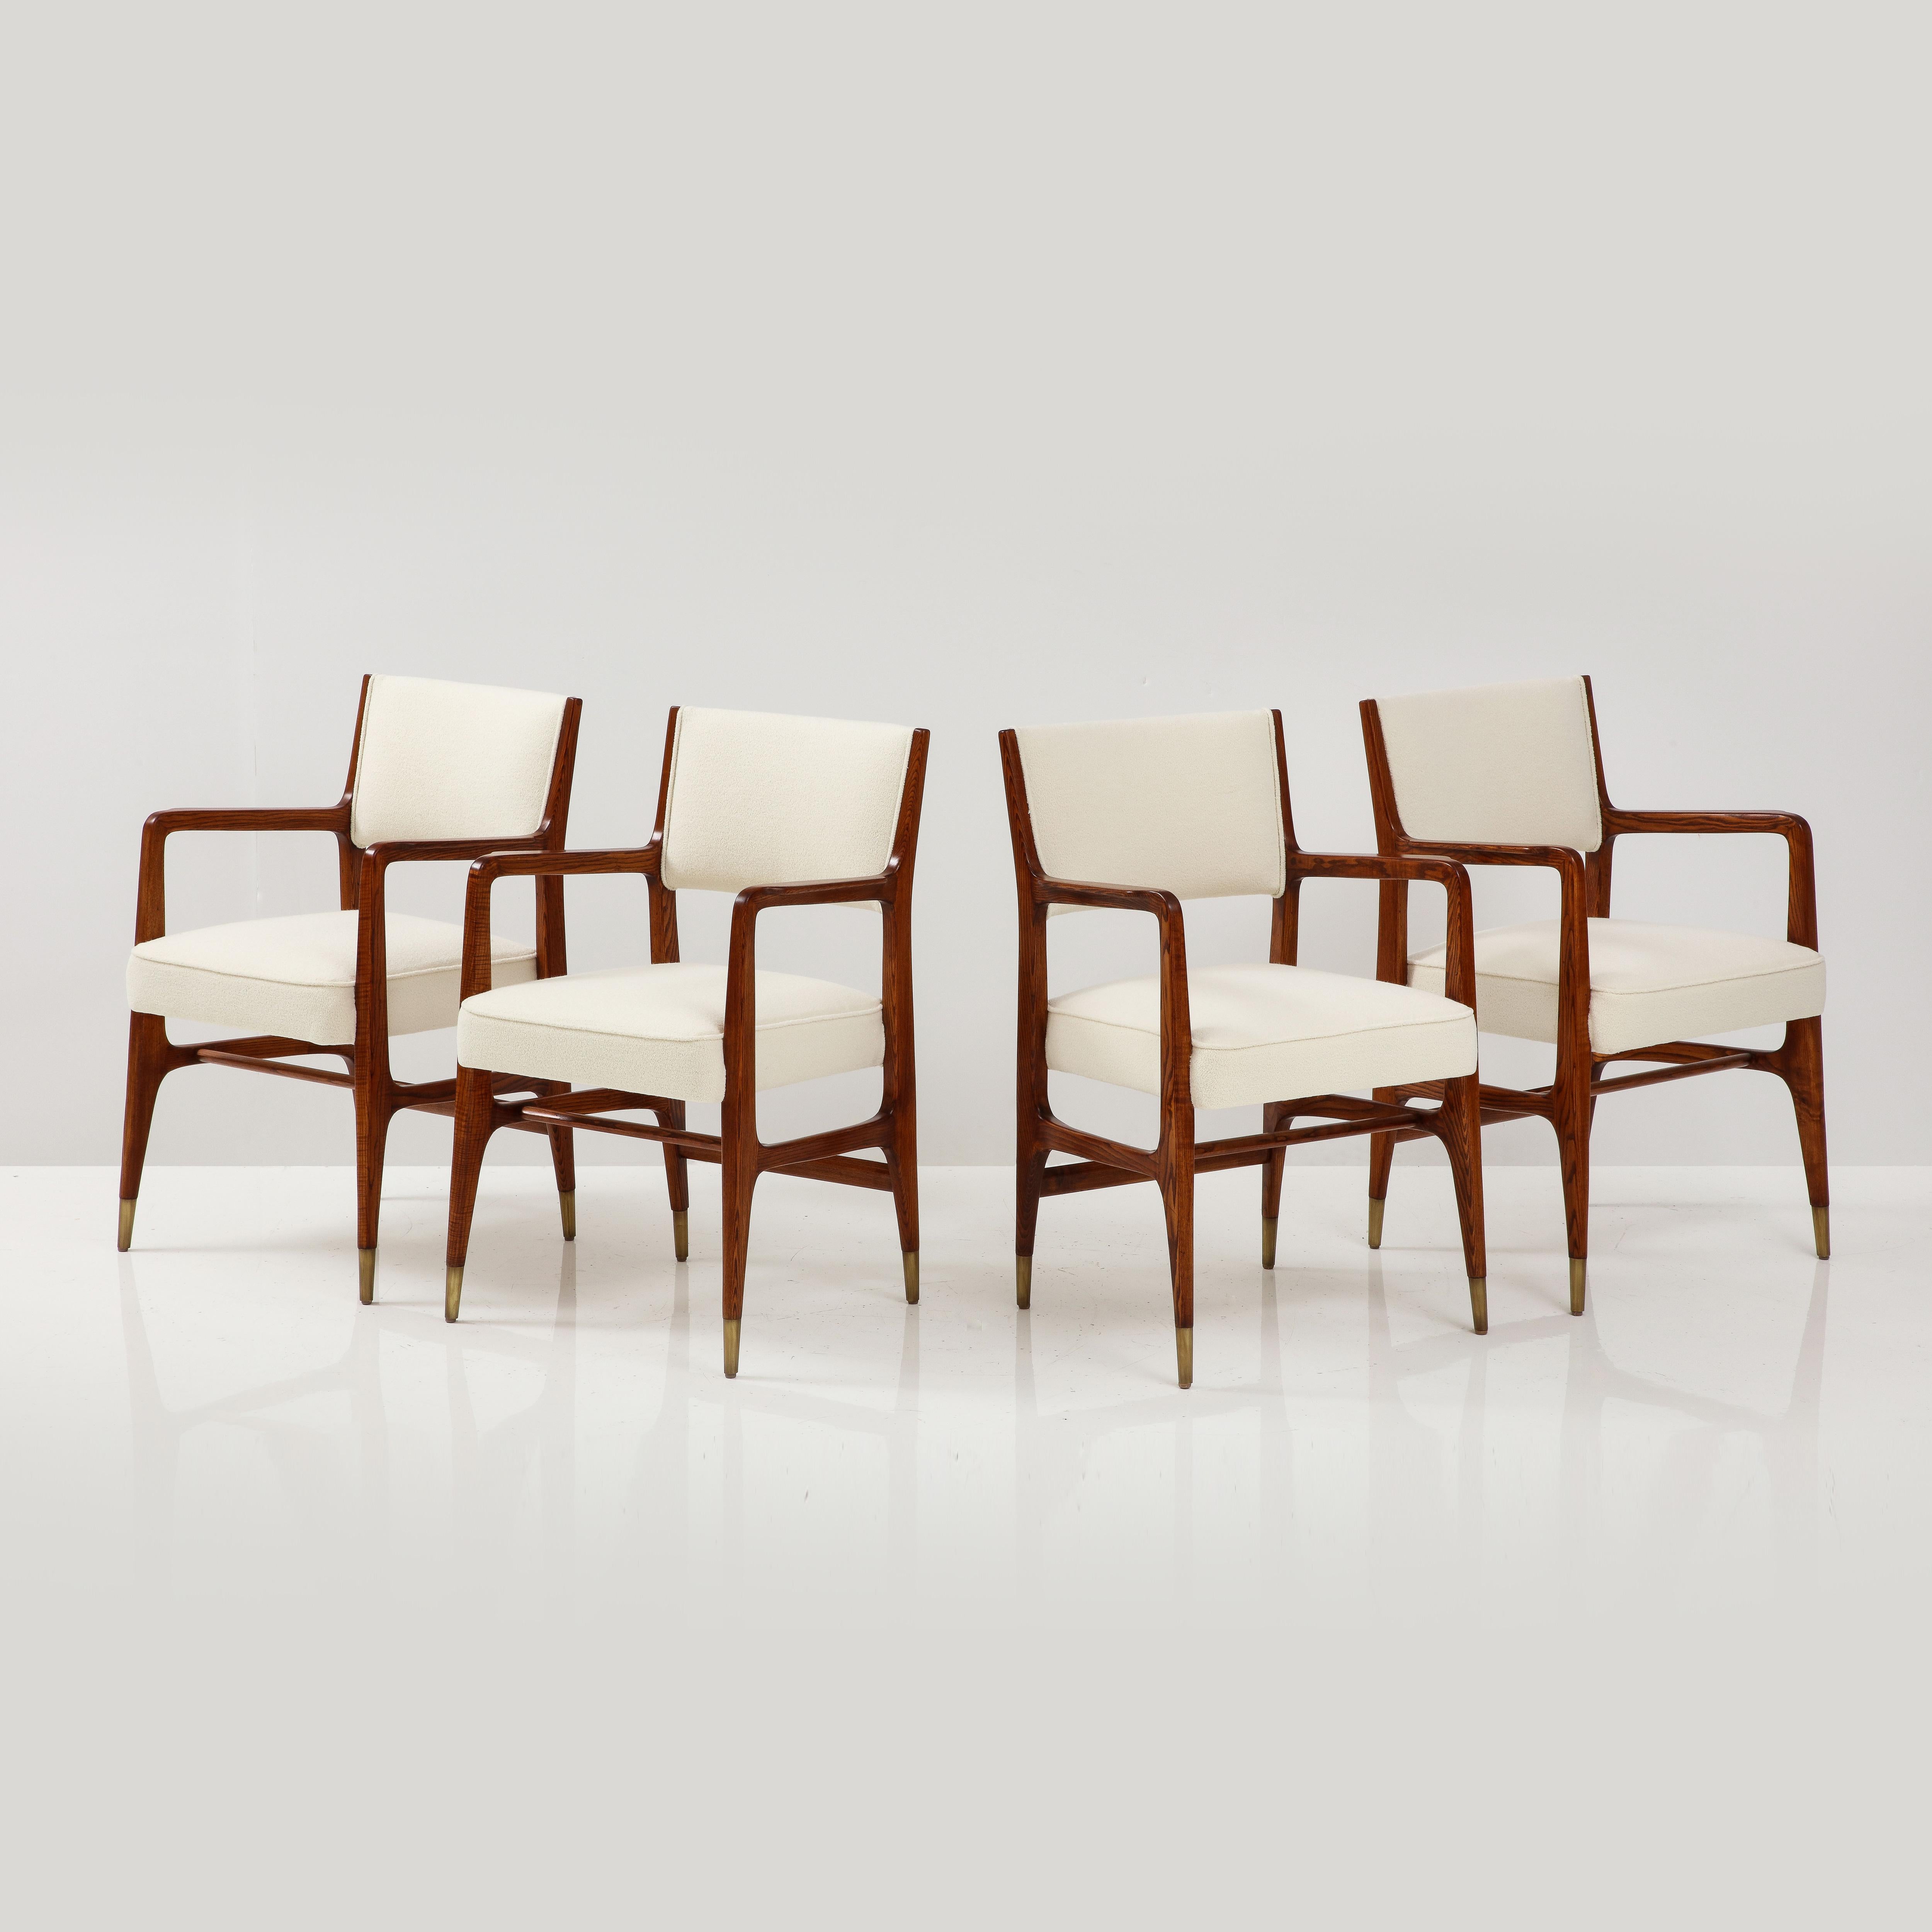 European Gio Ponti for Cassina Rare Set of 8 Dining Chairs Model 110 in Ivory Bouclé